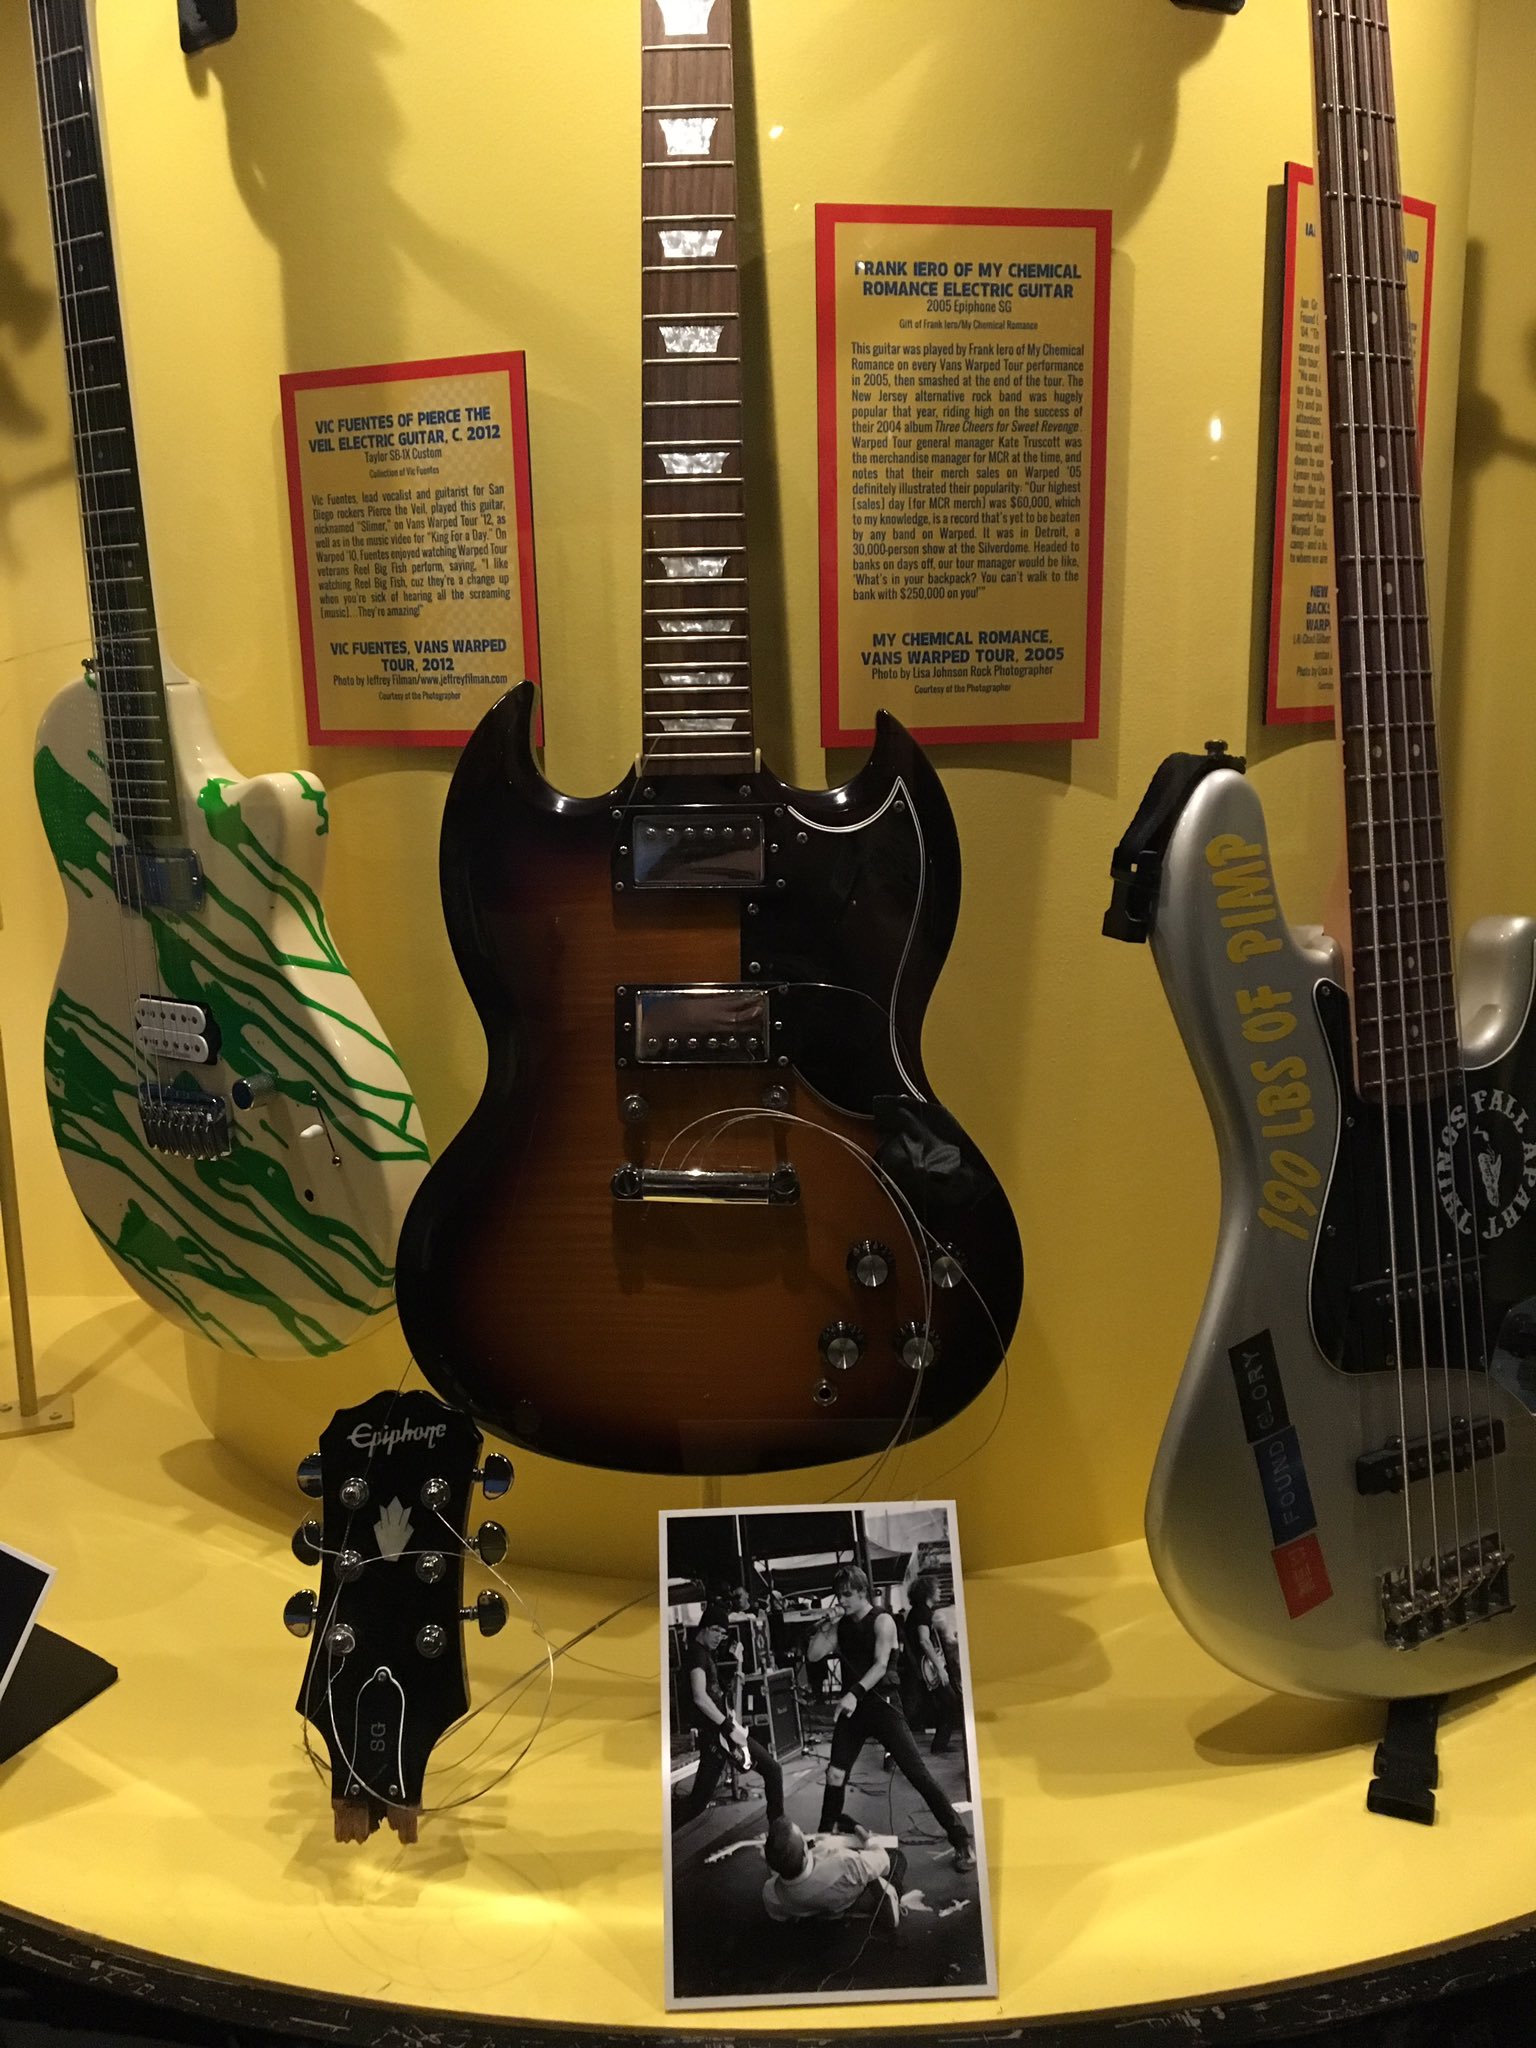 Cat but no fiddle on Twitter: "saw @FrankIero 's guitar he smashed at the  vans celebration exhibit at the rock n roll hall of fame, hell yeah  https://t.co/ybpYgm19Bj" / Twitter